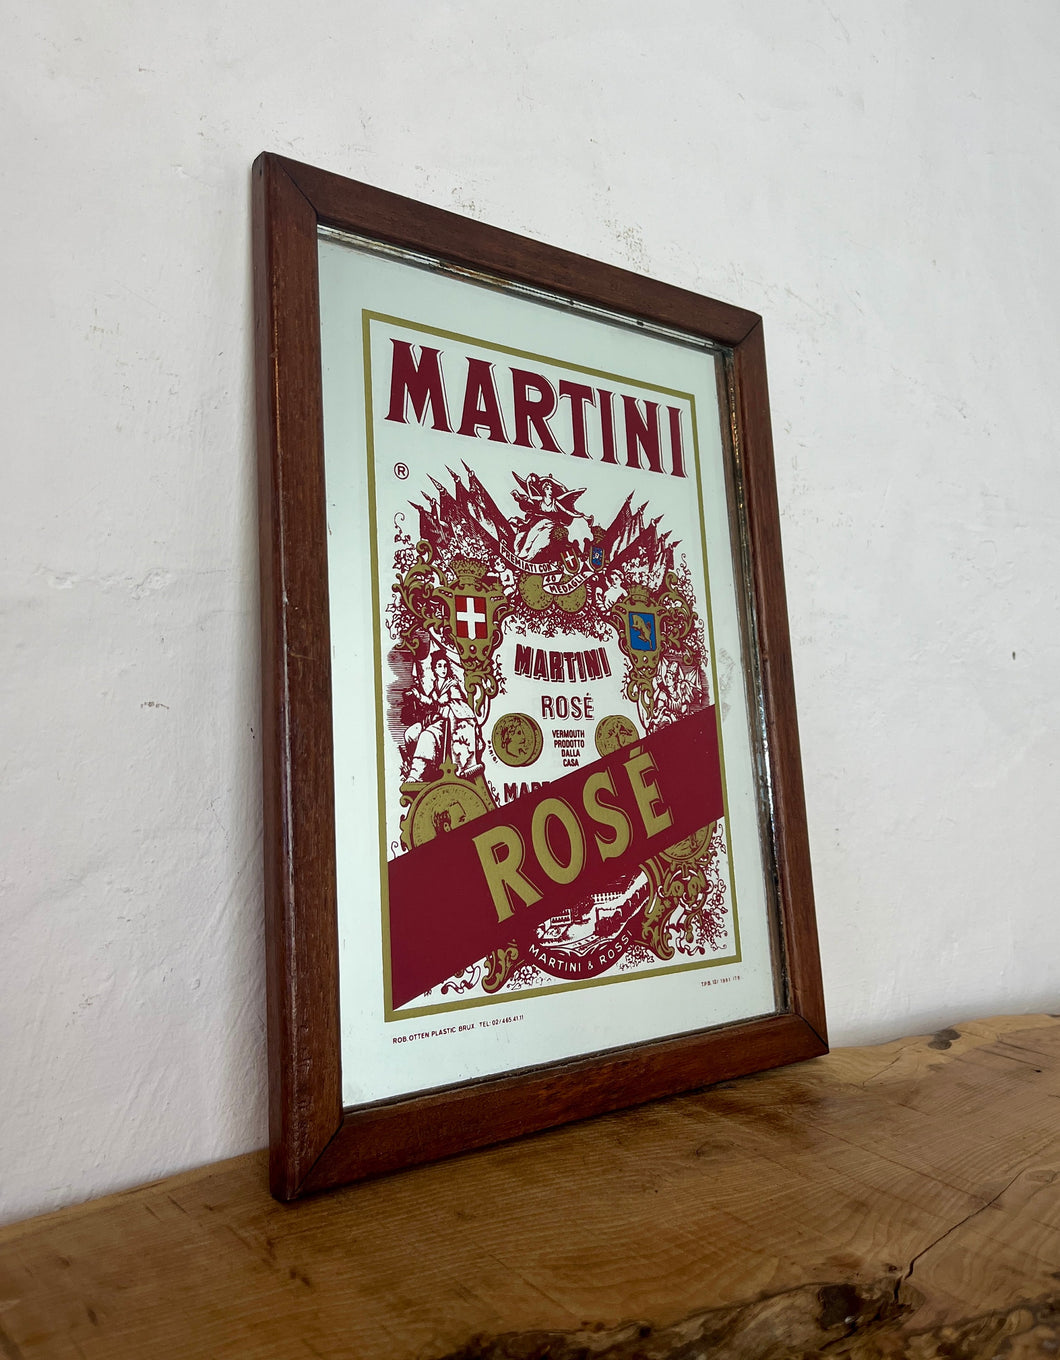 Wonderful art deco Martini rose vintage mirror with vibrant intricate pattern and detail with stand out logo on the famous branding the famous emblem advertising the rose version on the alcohol drink.